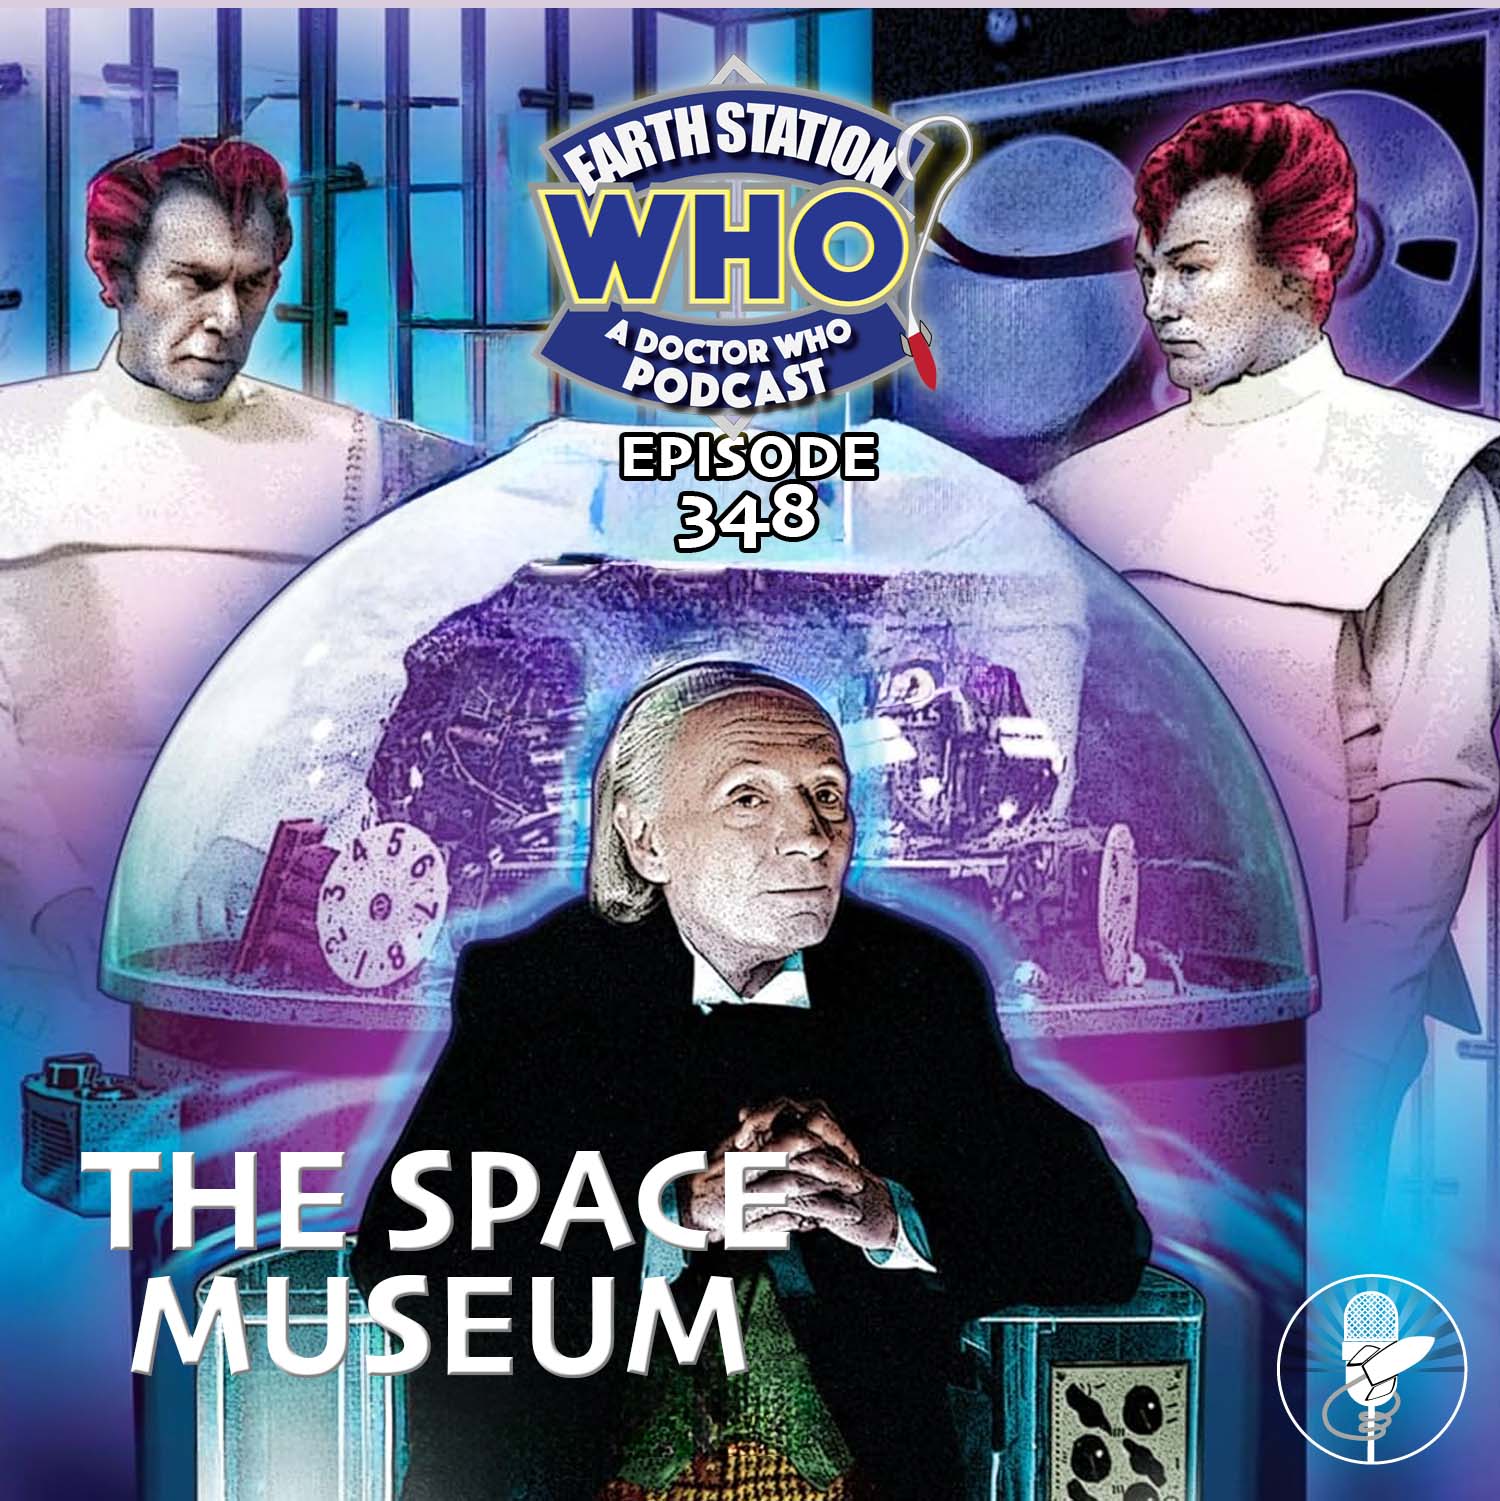 Earth Station Who Ep 348 - The Space Museum Review